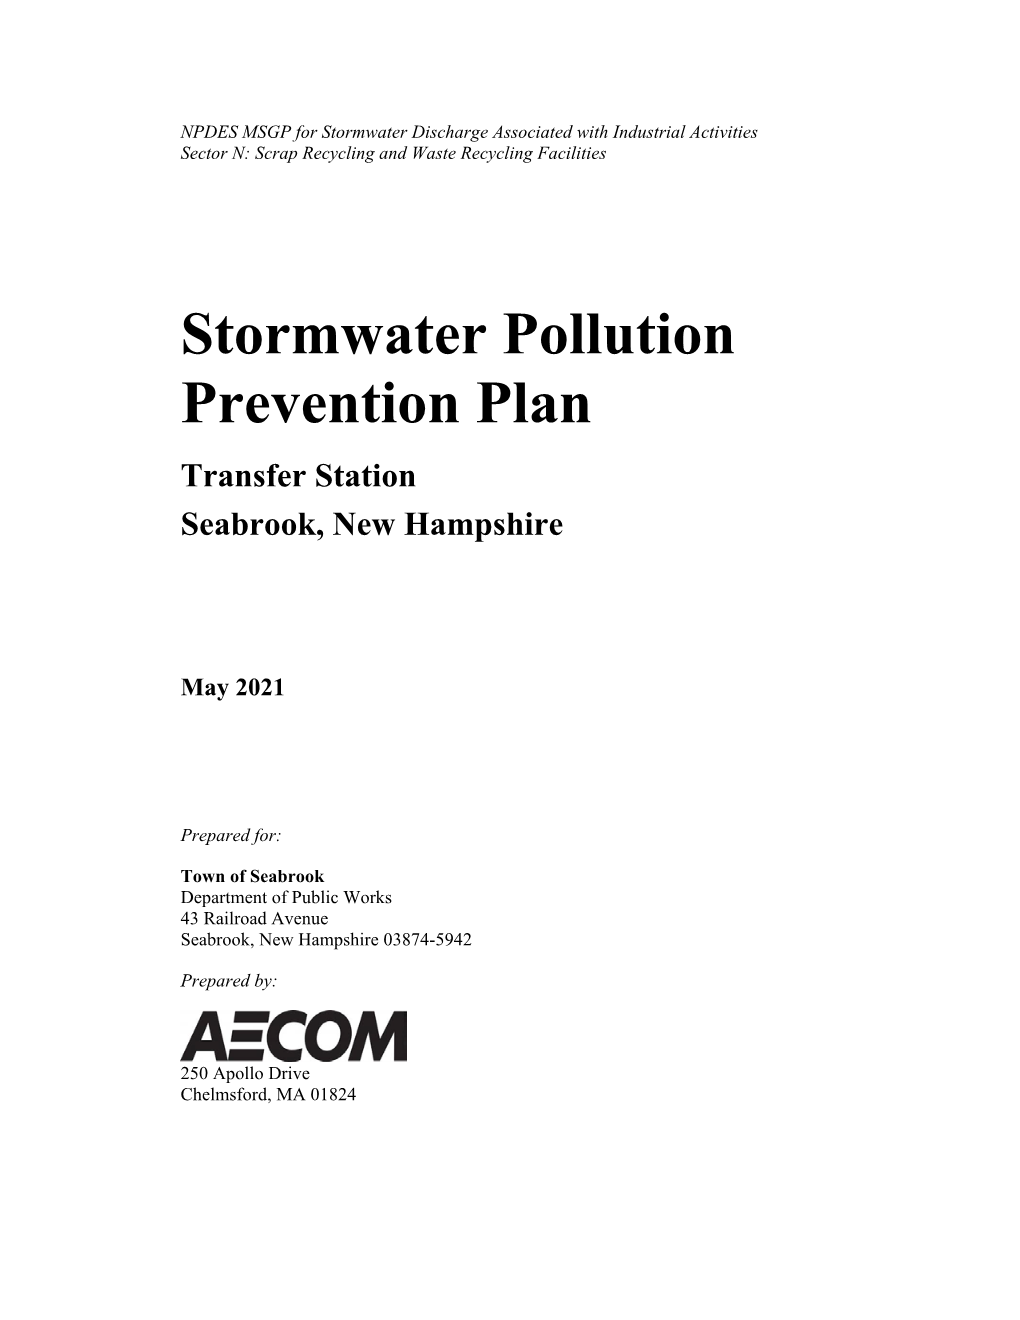 Transfer Station Stormwater Pollution Prevention Plan